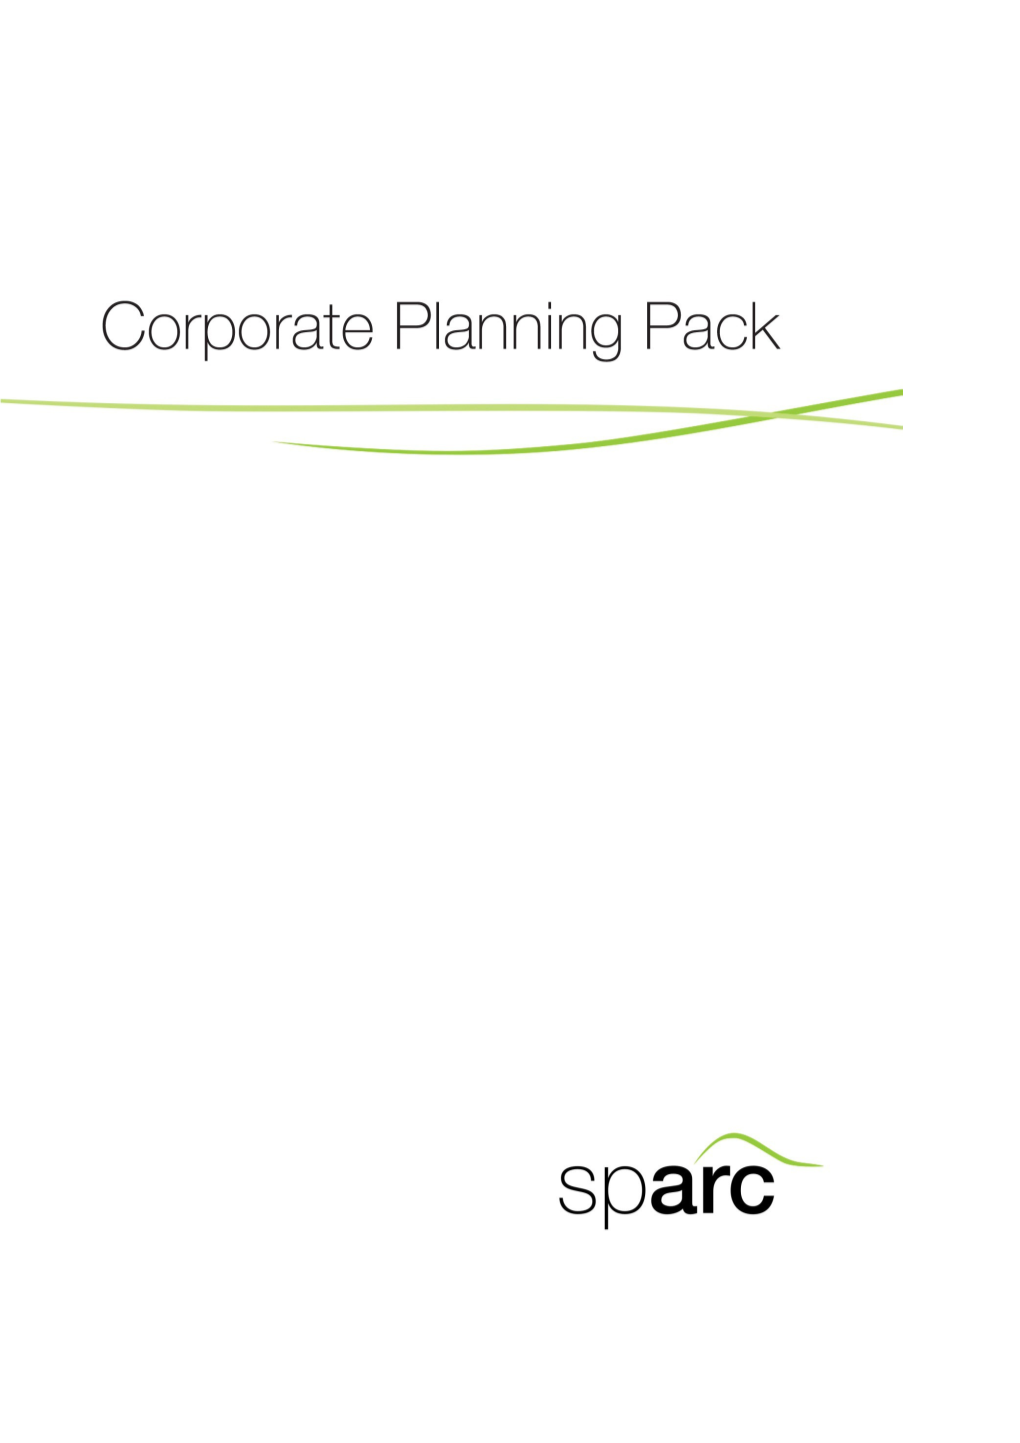 Concept and Definition of Corporate Planning